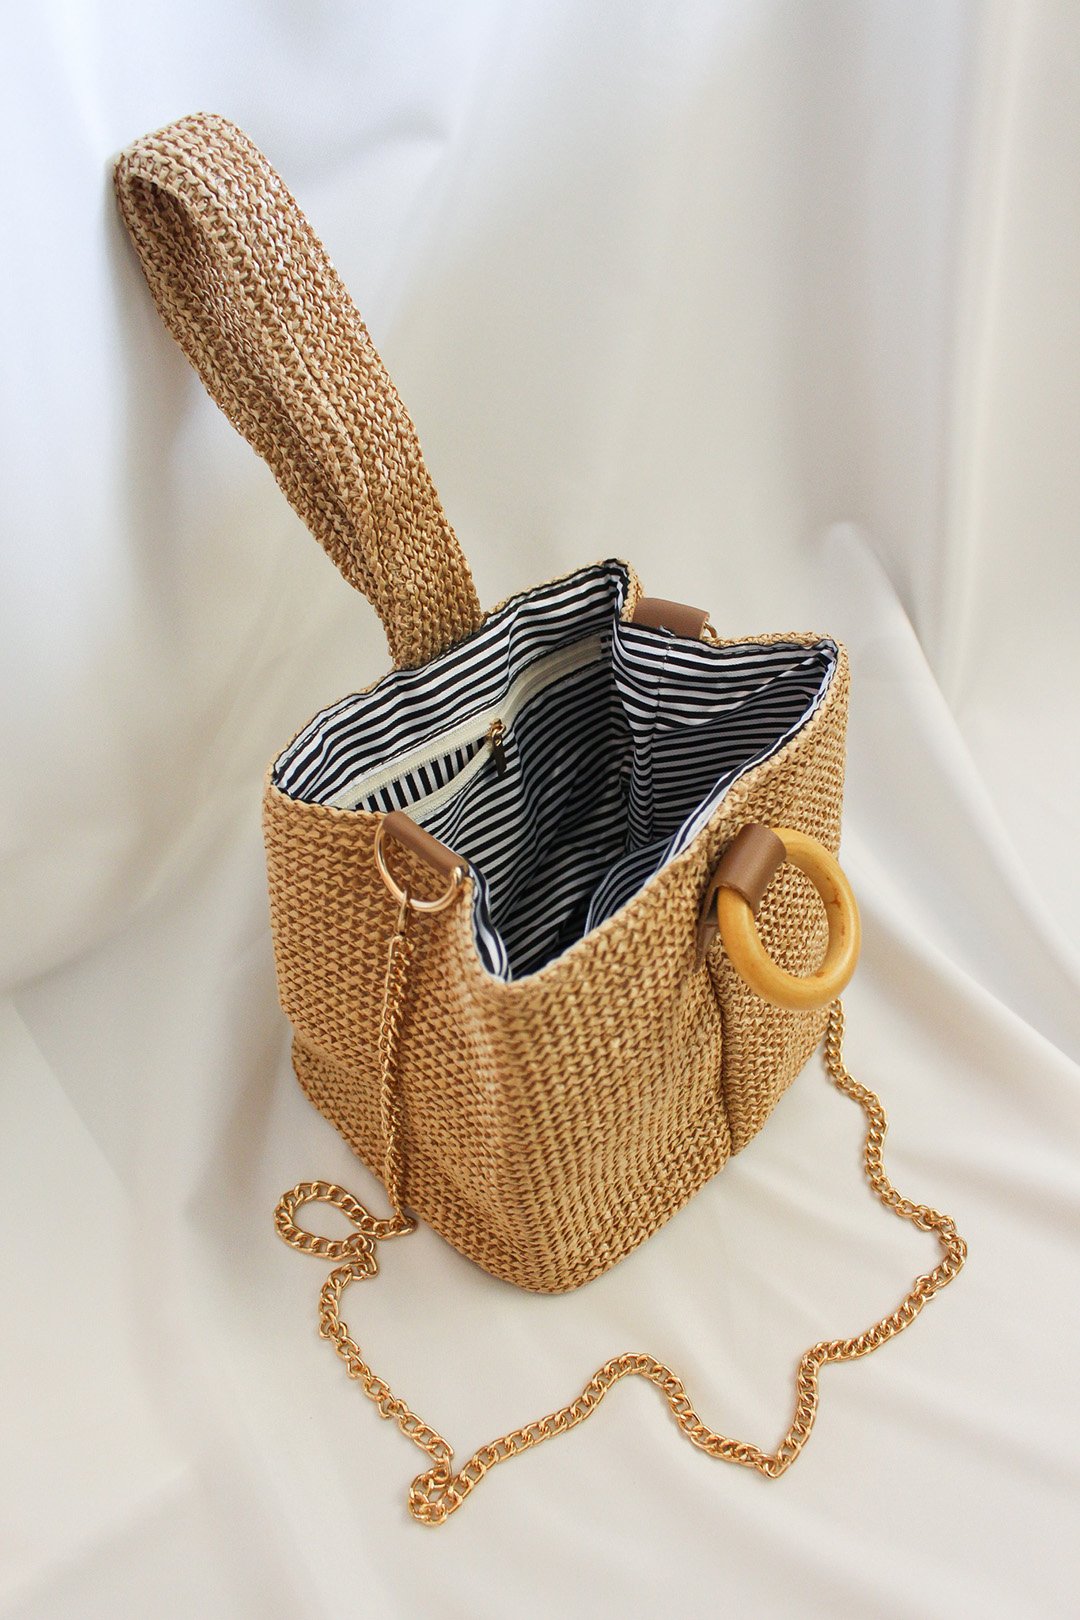 Trapezium rattan look straw Box Bag, perfect for summer with gold chain and wooden hoops. Summer beach vibe